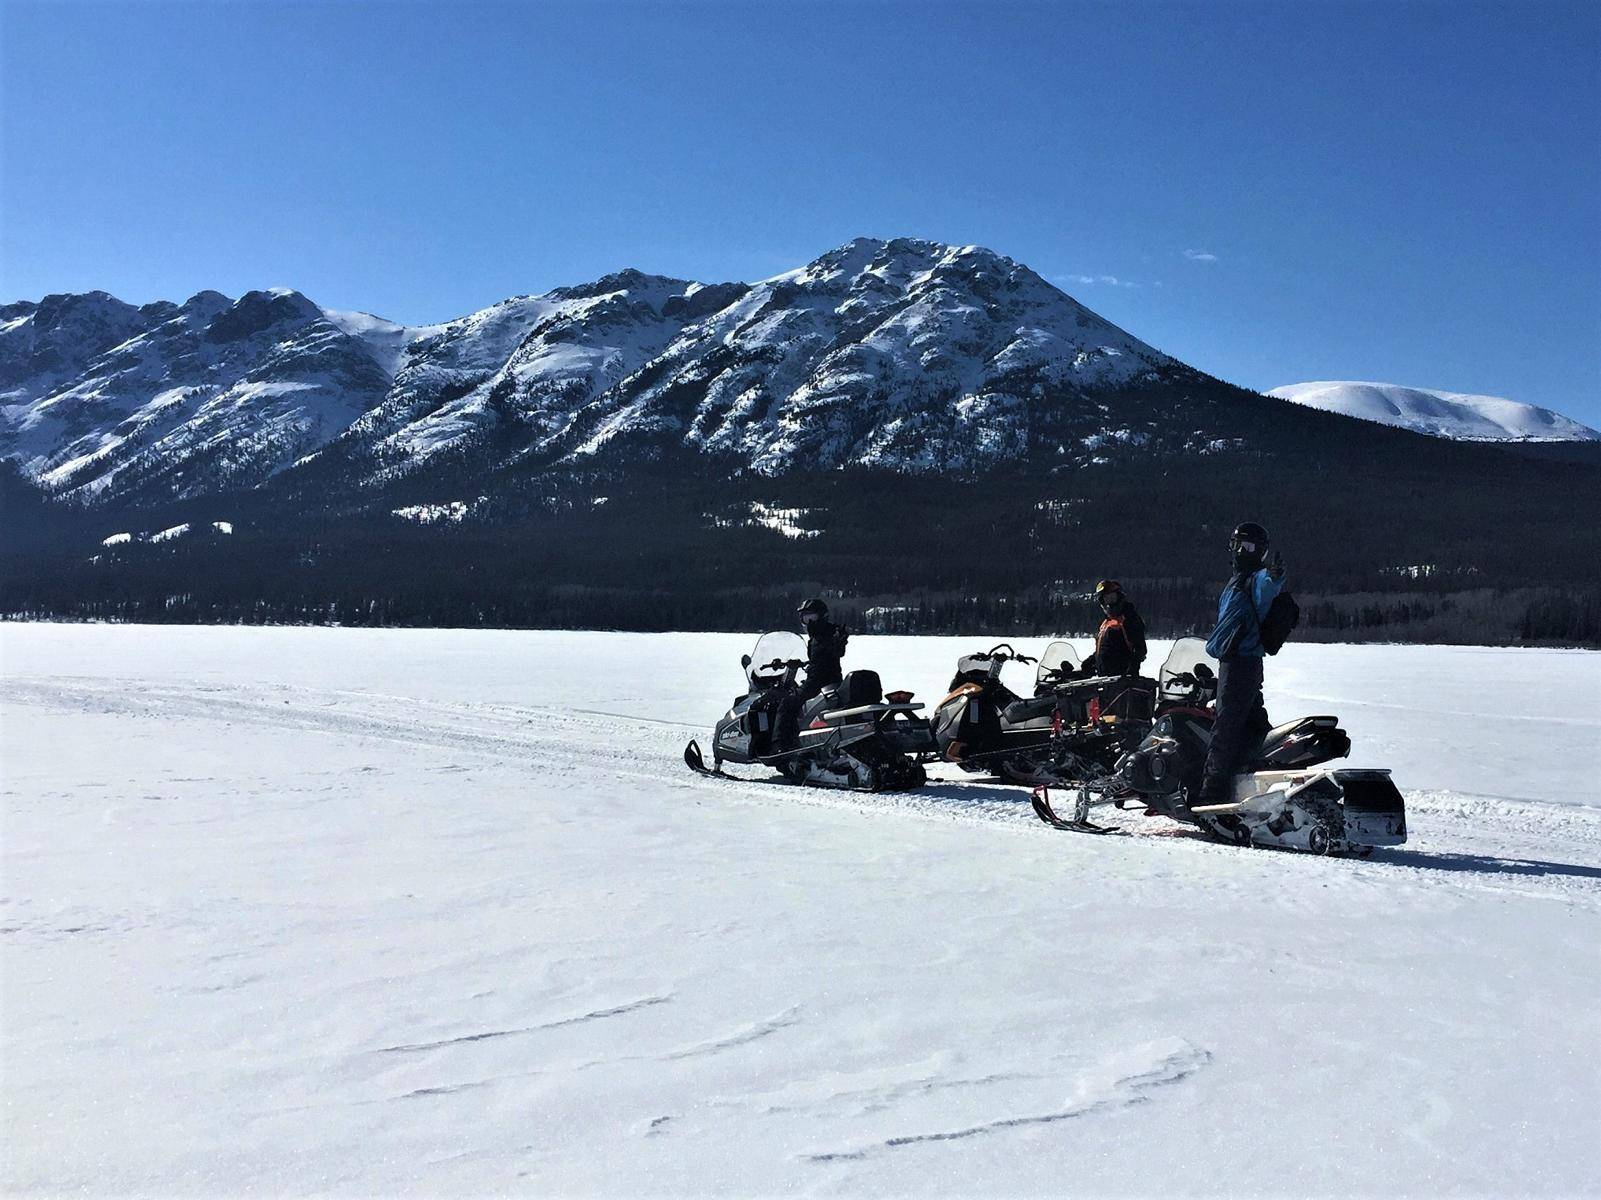 3 people riding skidoos on the frozen lake towards the snowy mountains